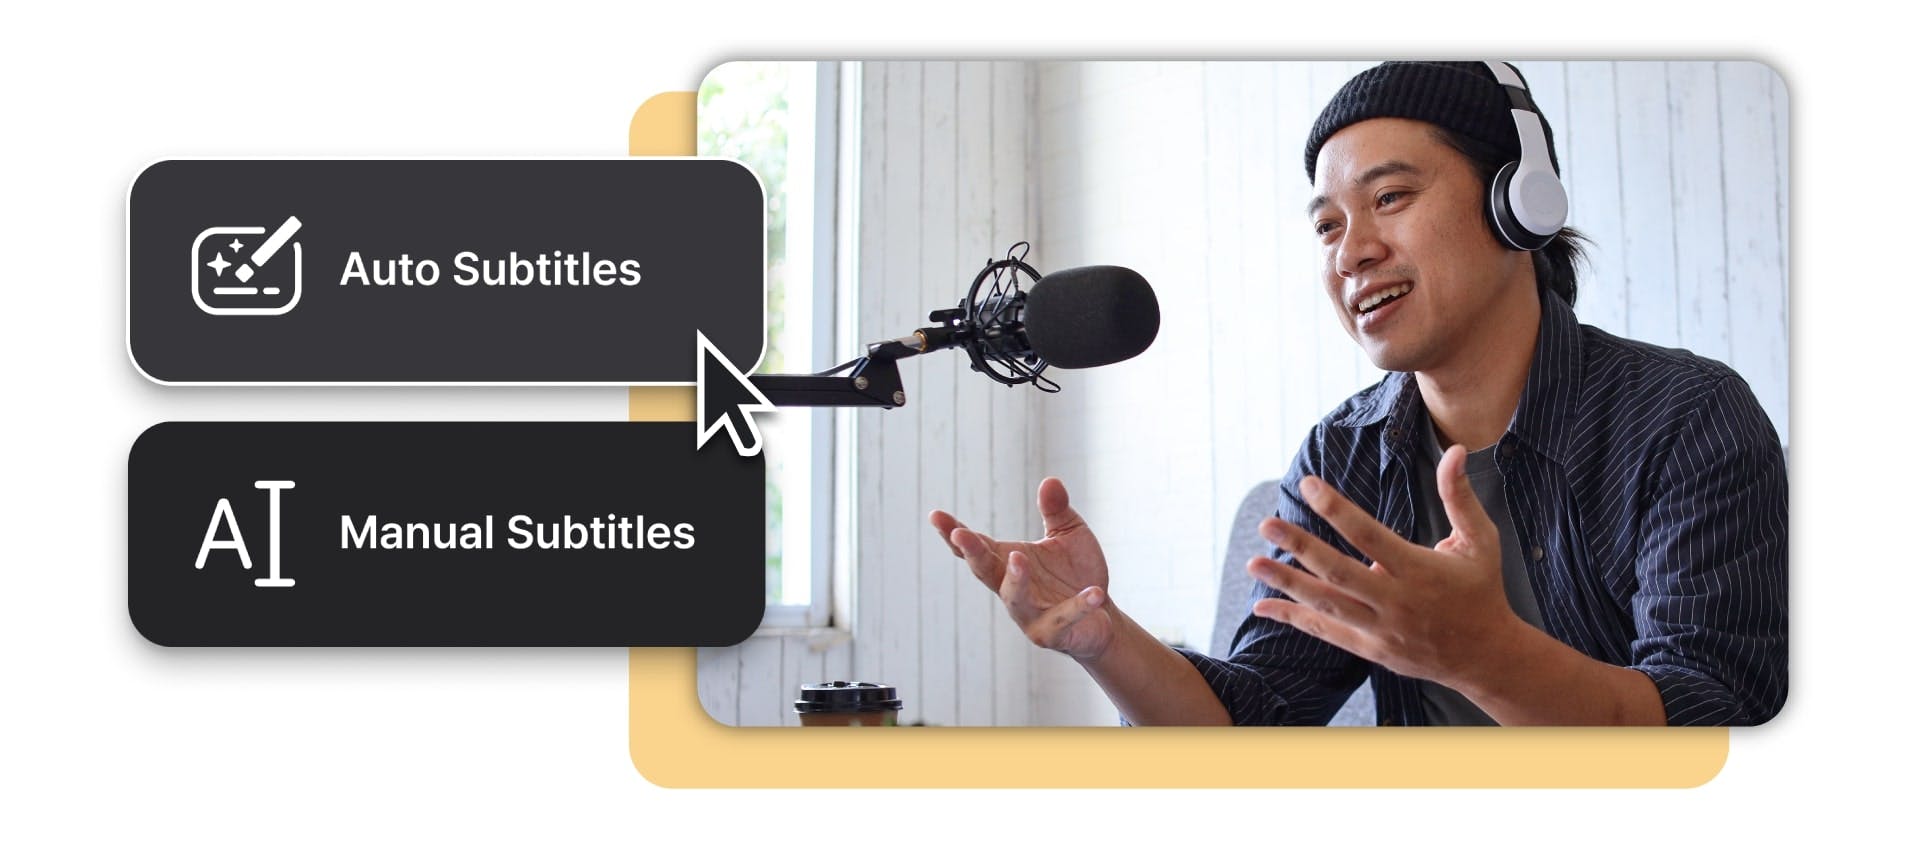 person with headphones recording a podcast and to the left two buttons showing the words auto subtitles and manual subtitles